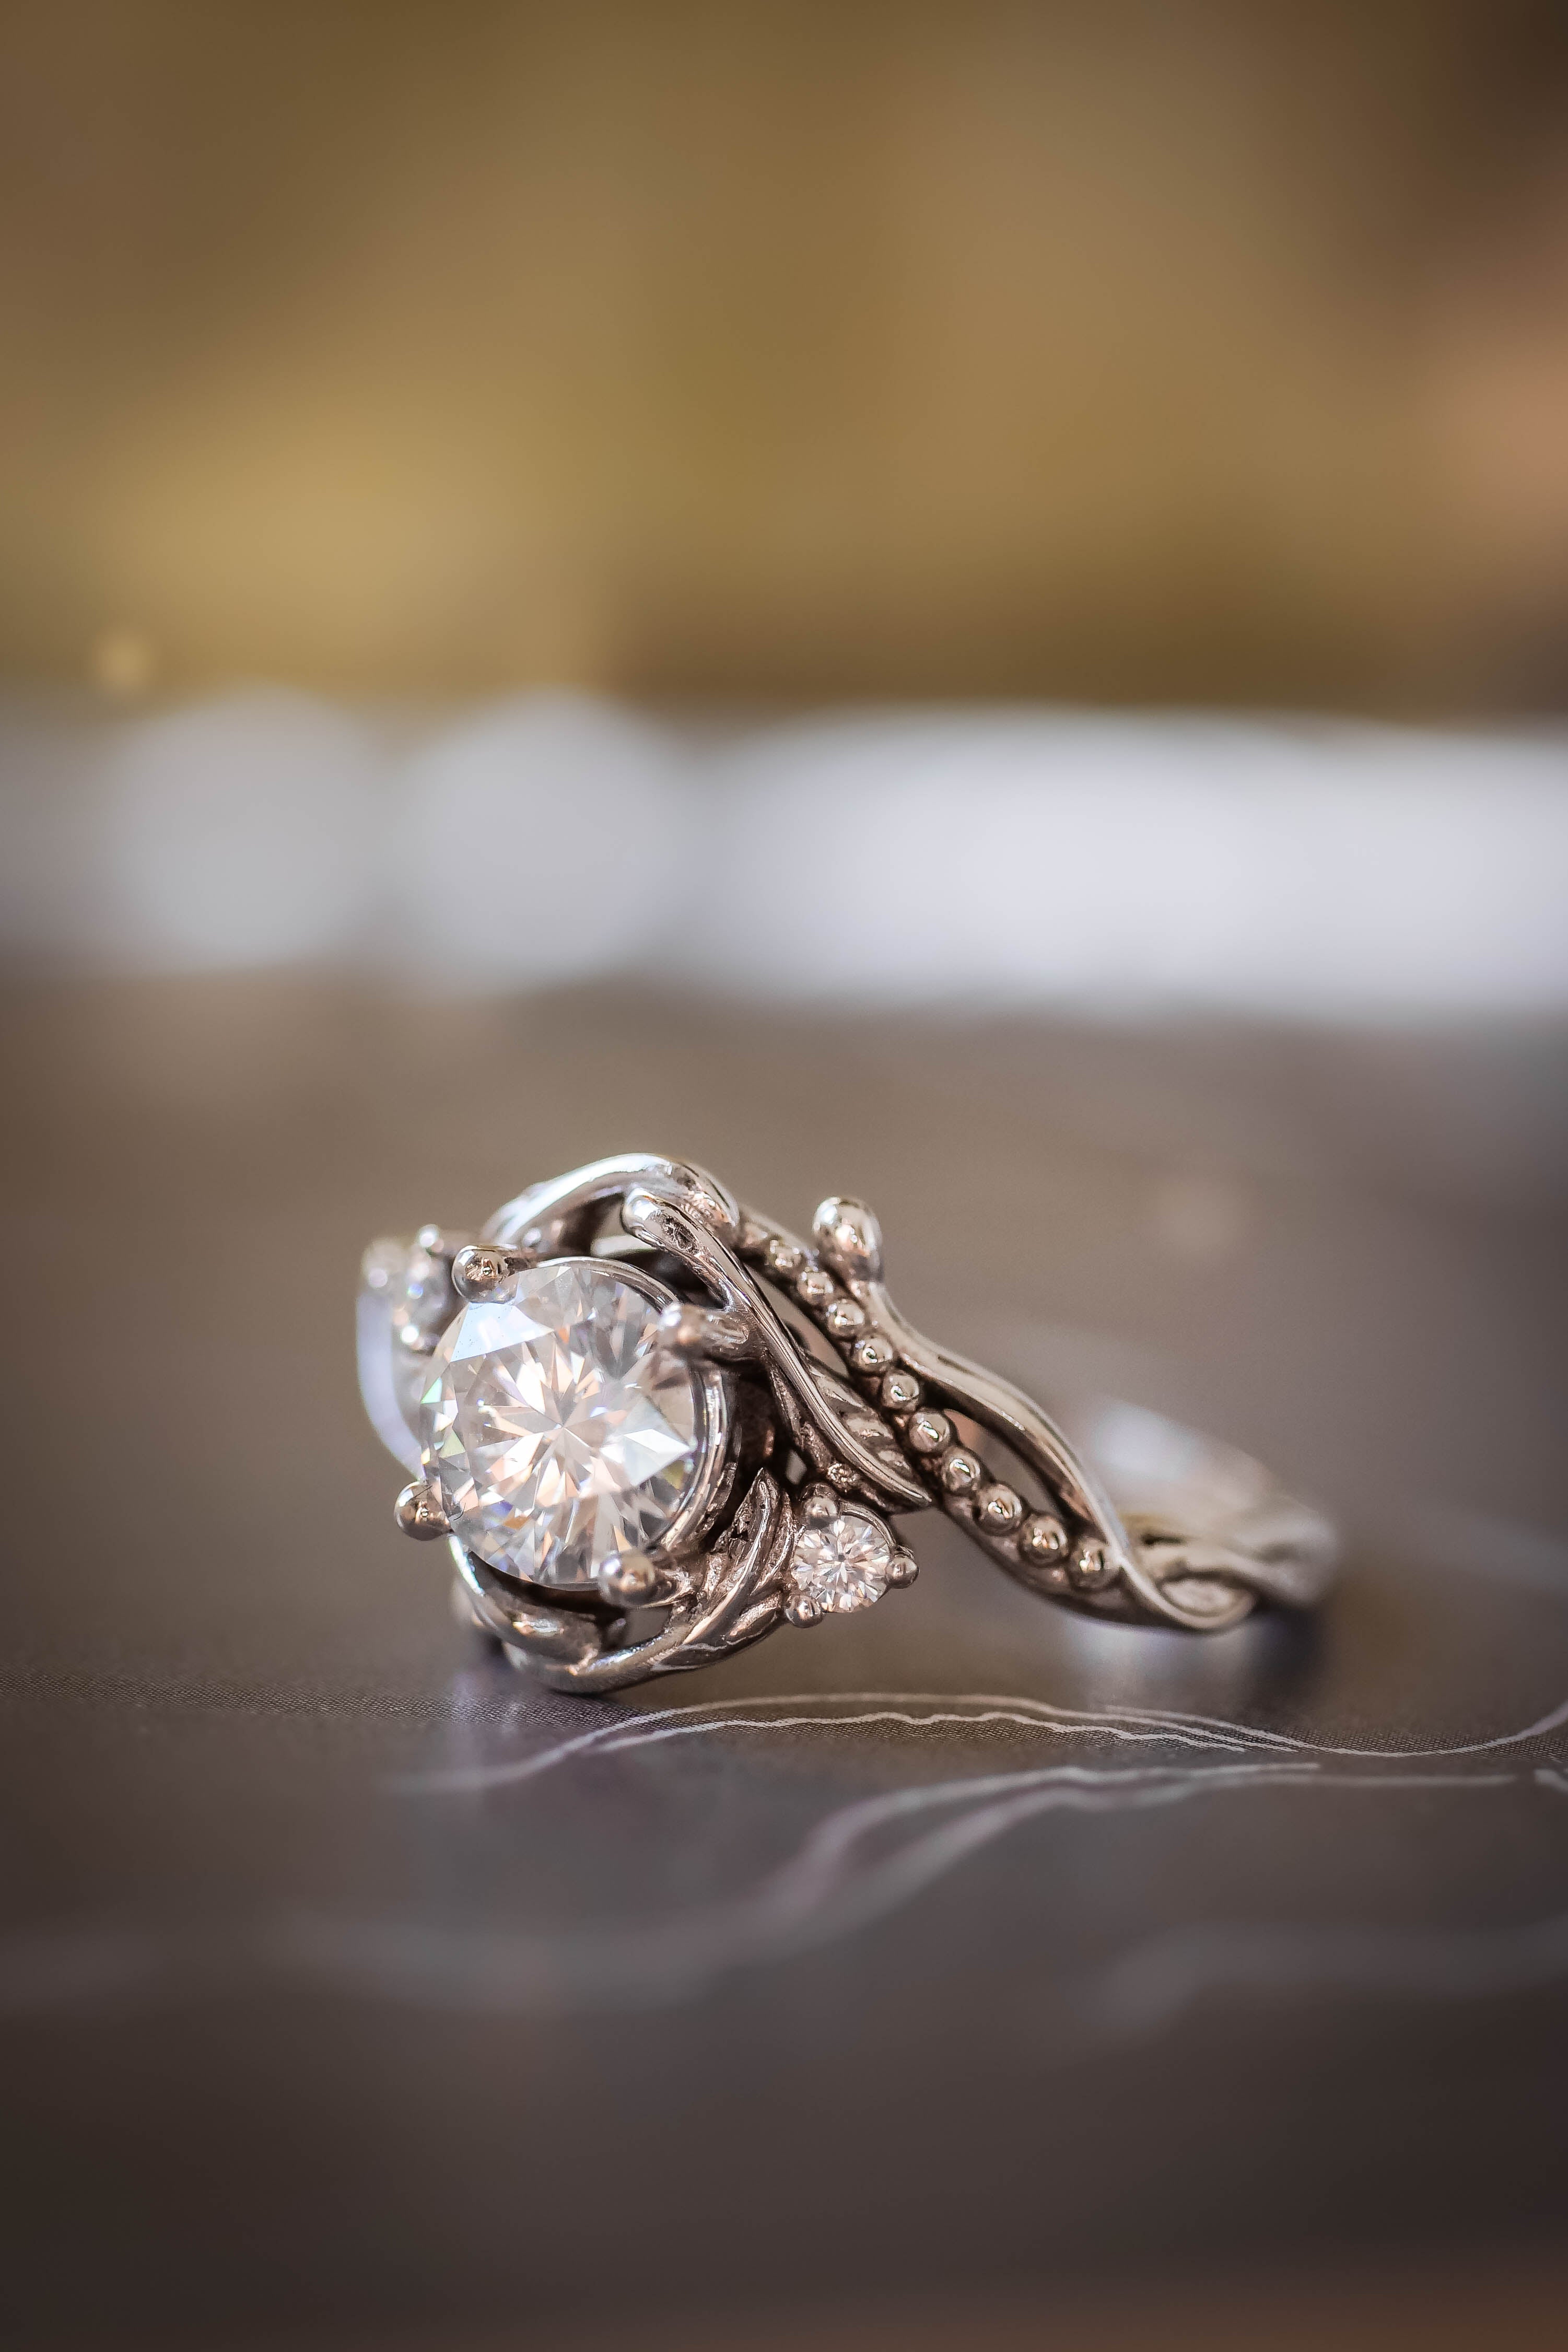 Top 11 Places to Buy Wedding and Engagement Rings Philippines